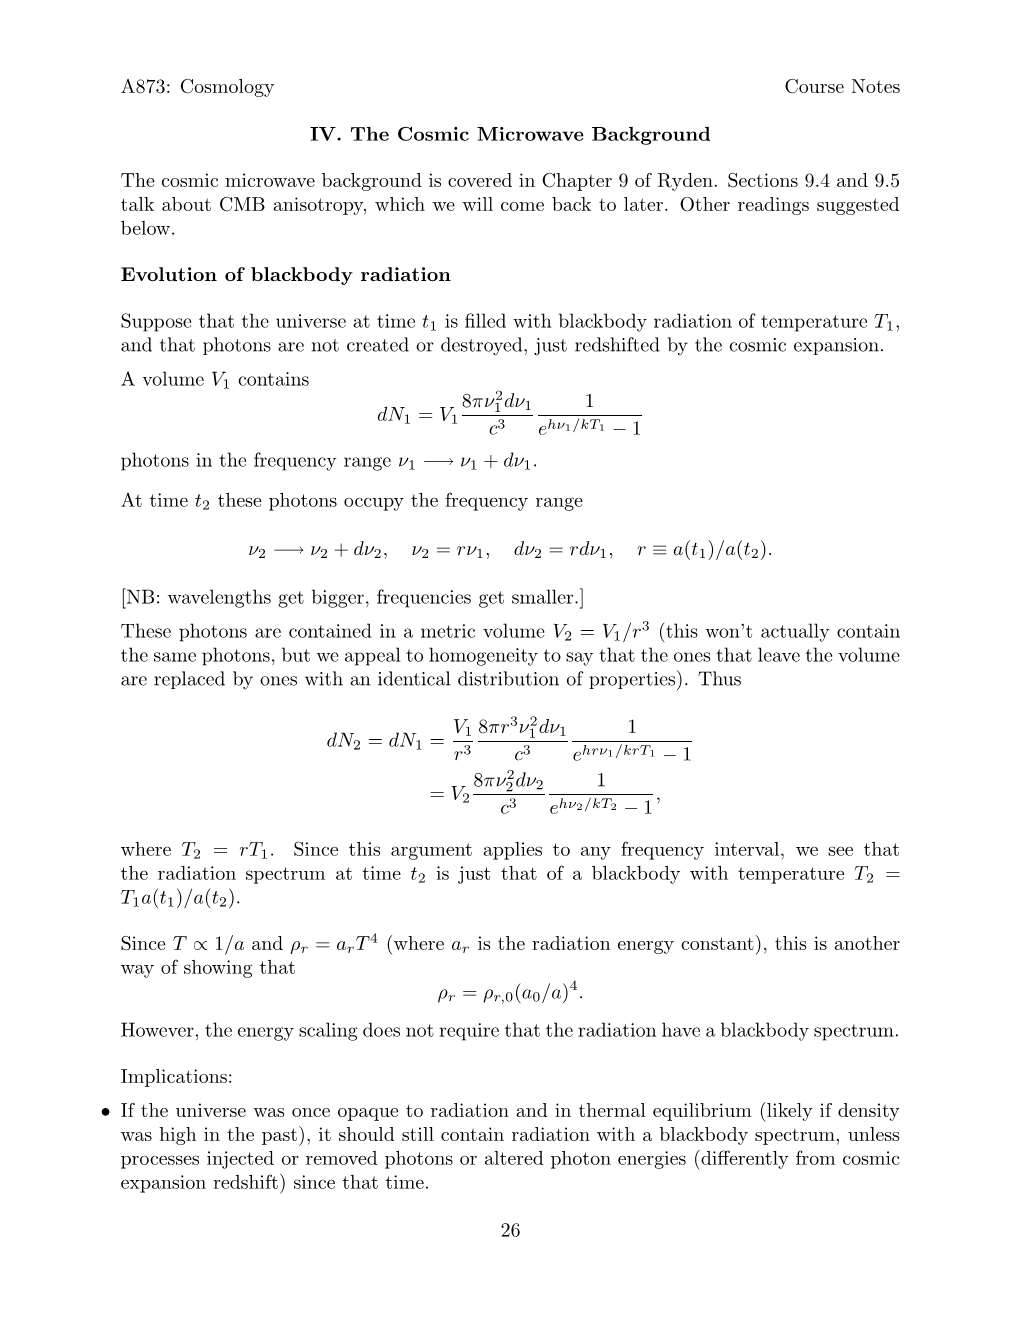 Cosmology Course Notes IV. the Cosmic Microwave Background